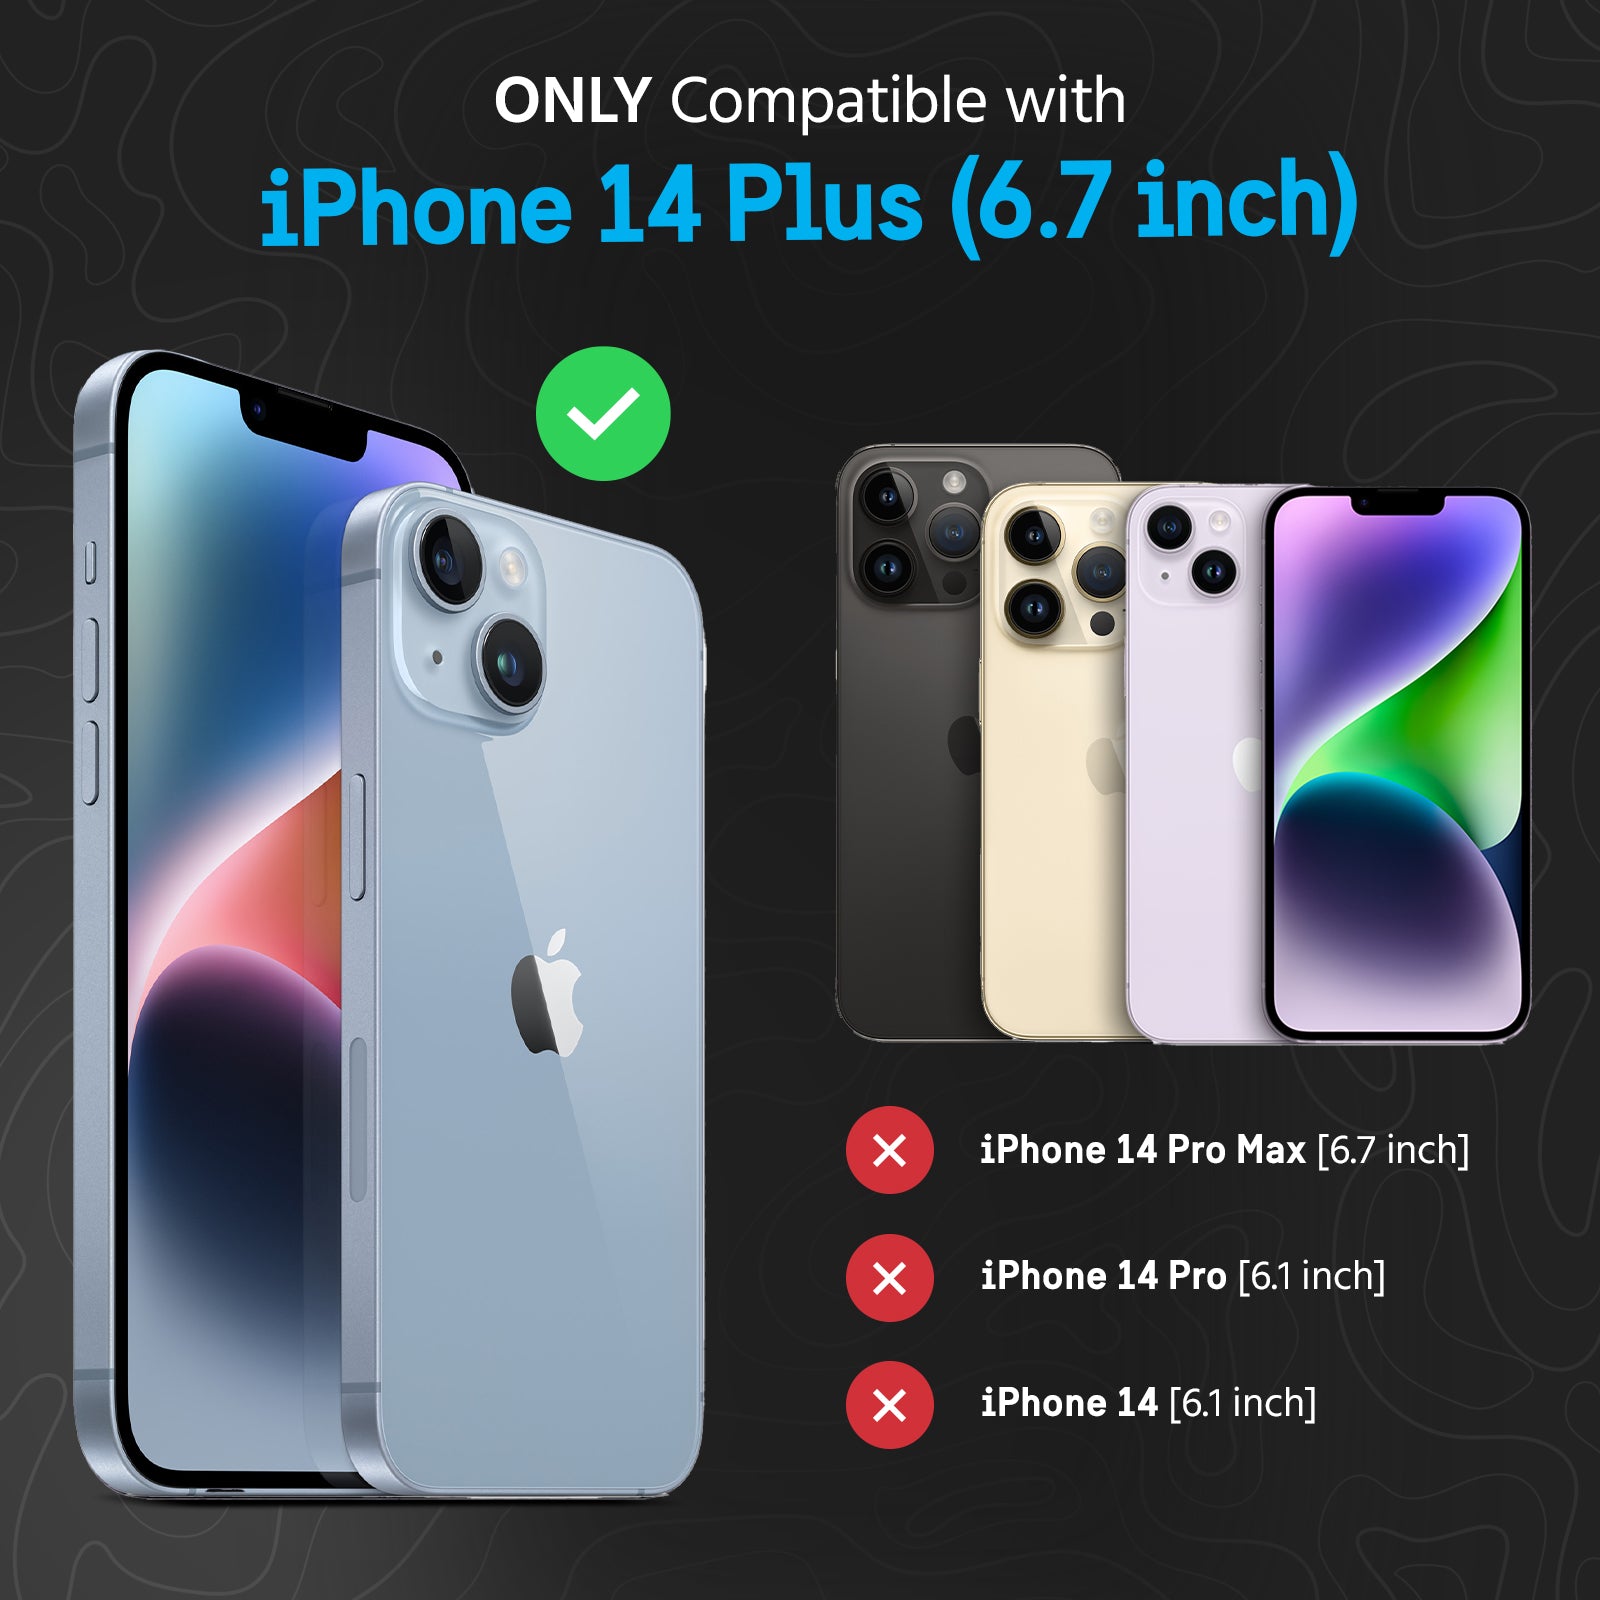 ONLY COMPATIBLE FOR IPHONE 14 PLUS (6.7 INCH)